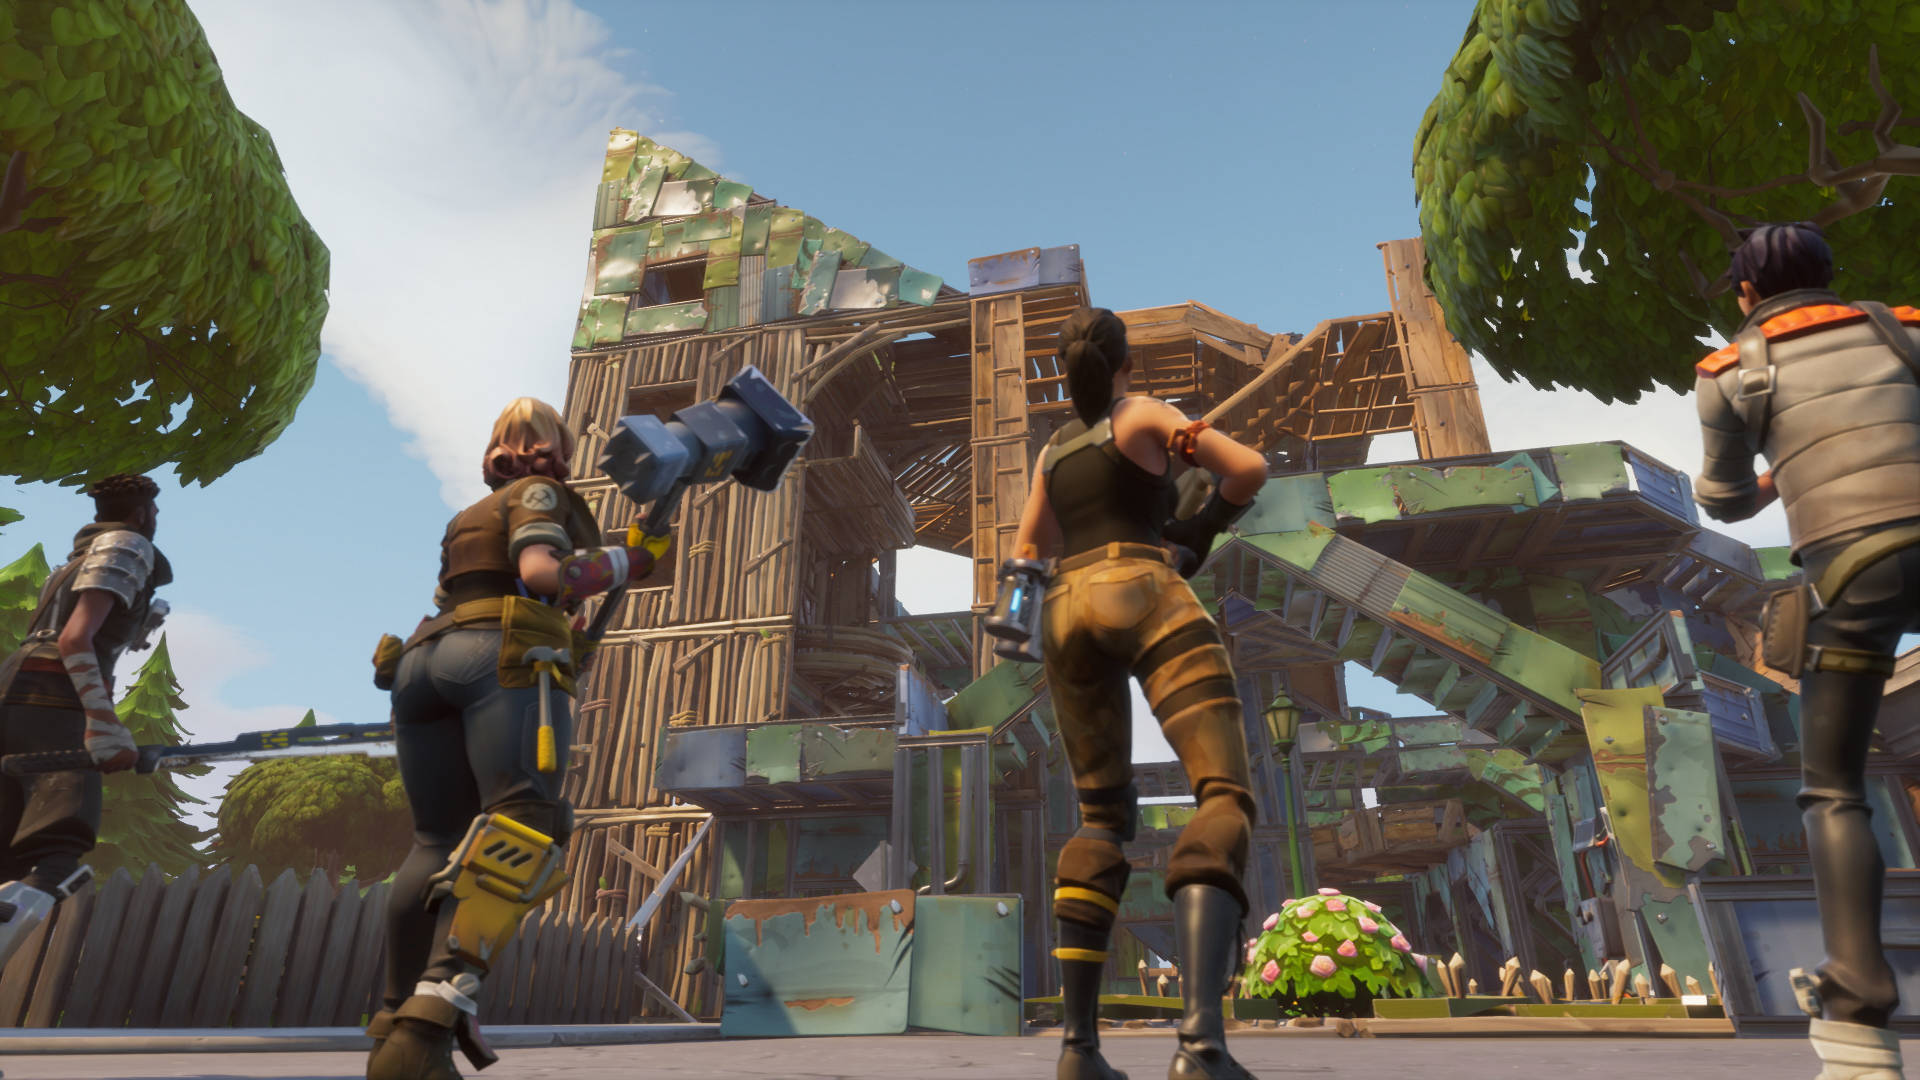 New Fortnite Battle Royale Mode Misses What Makes The Game Great